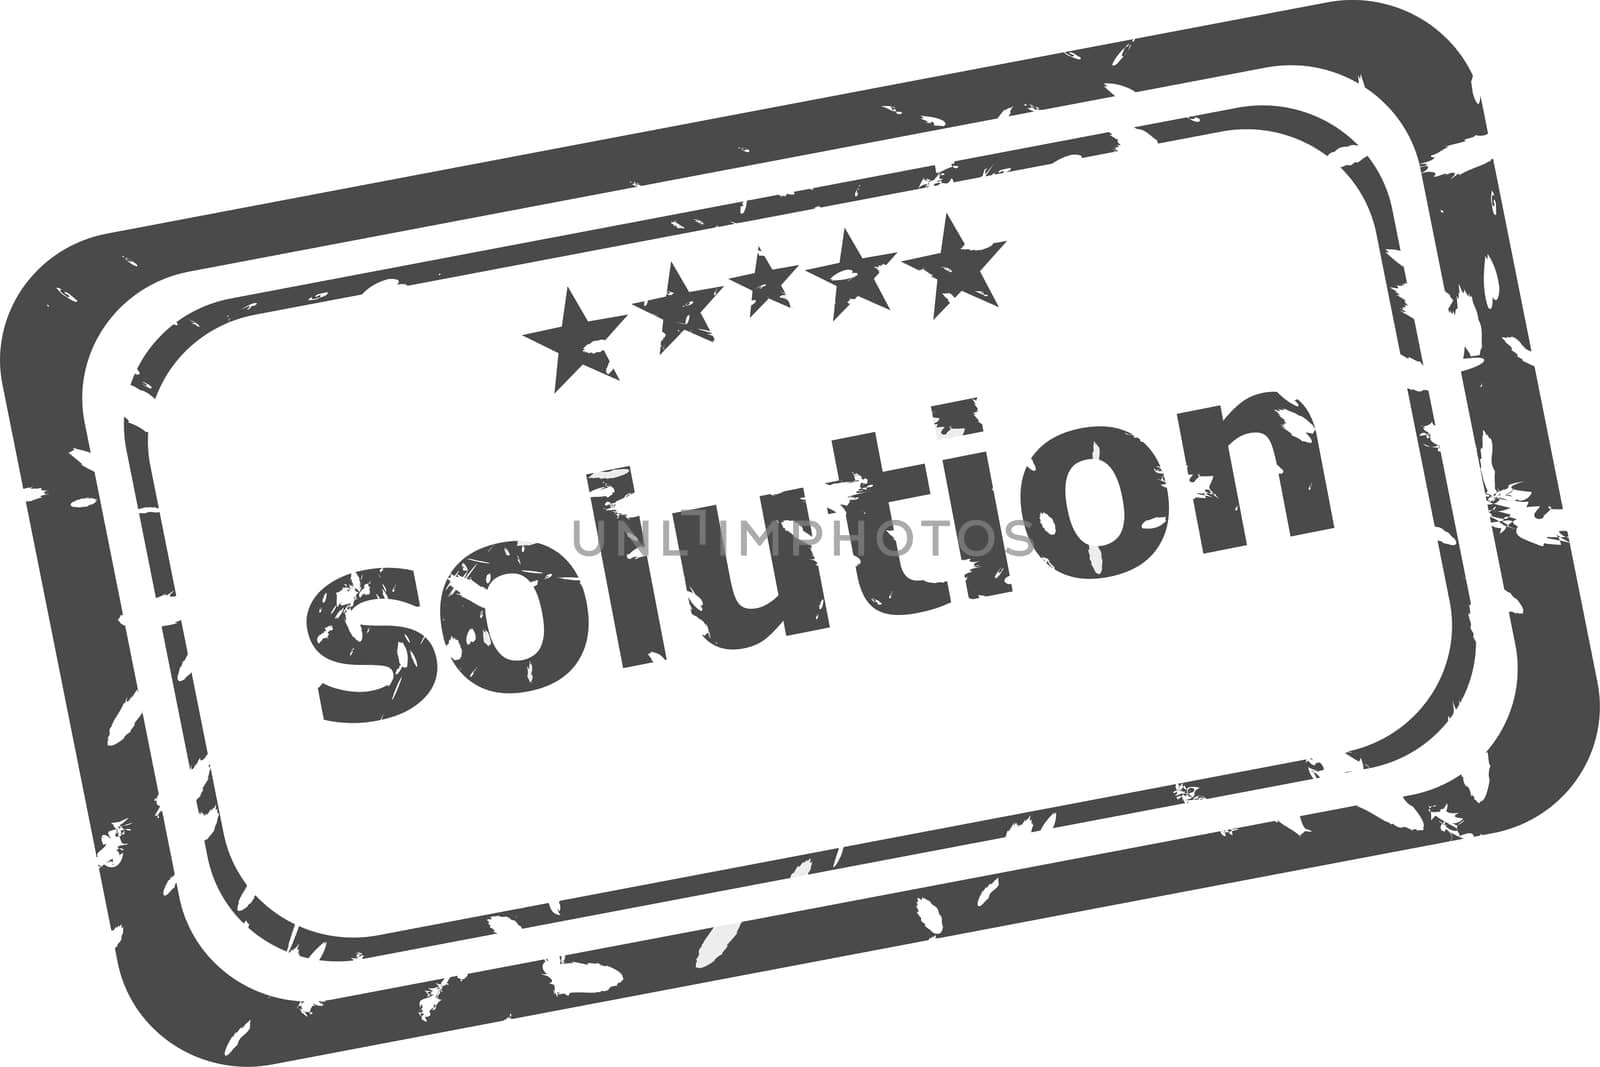 Solution grunge rubber stamp on white background